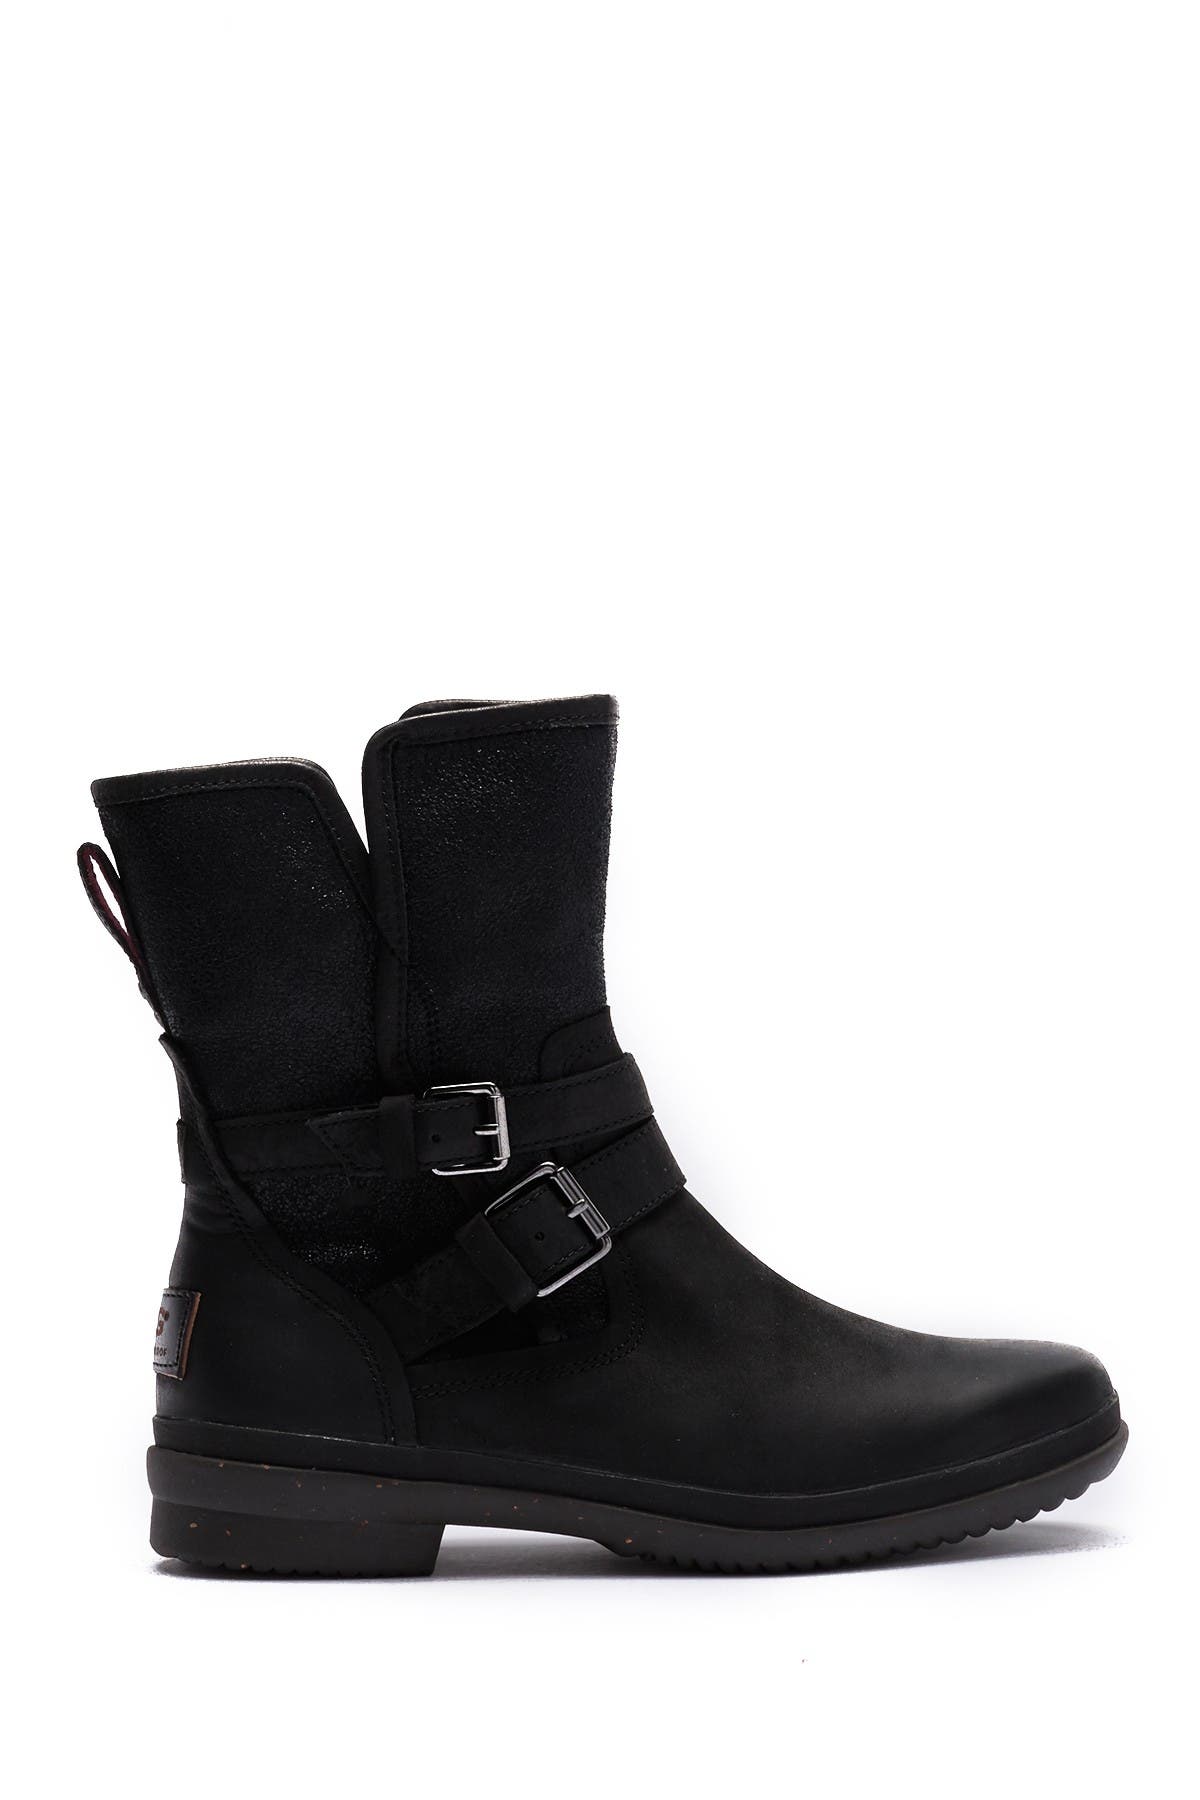 UGG | Simmens Genuine Shearling Lined 